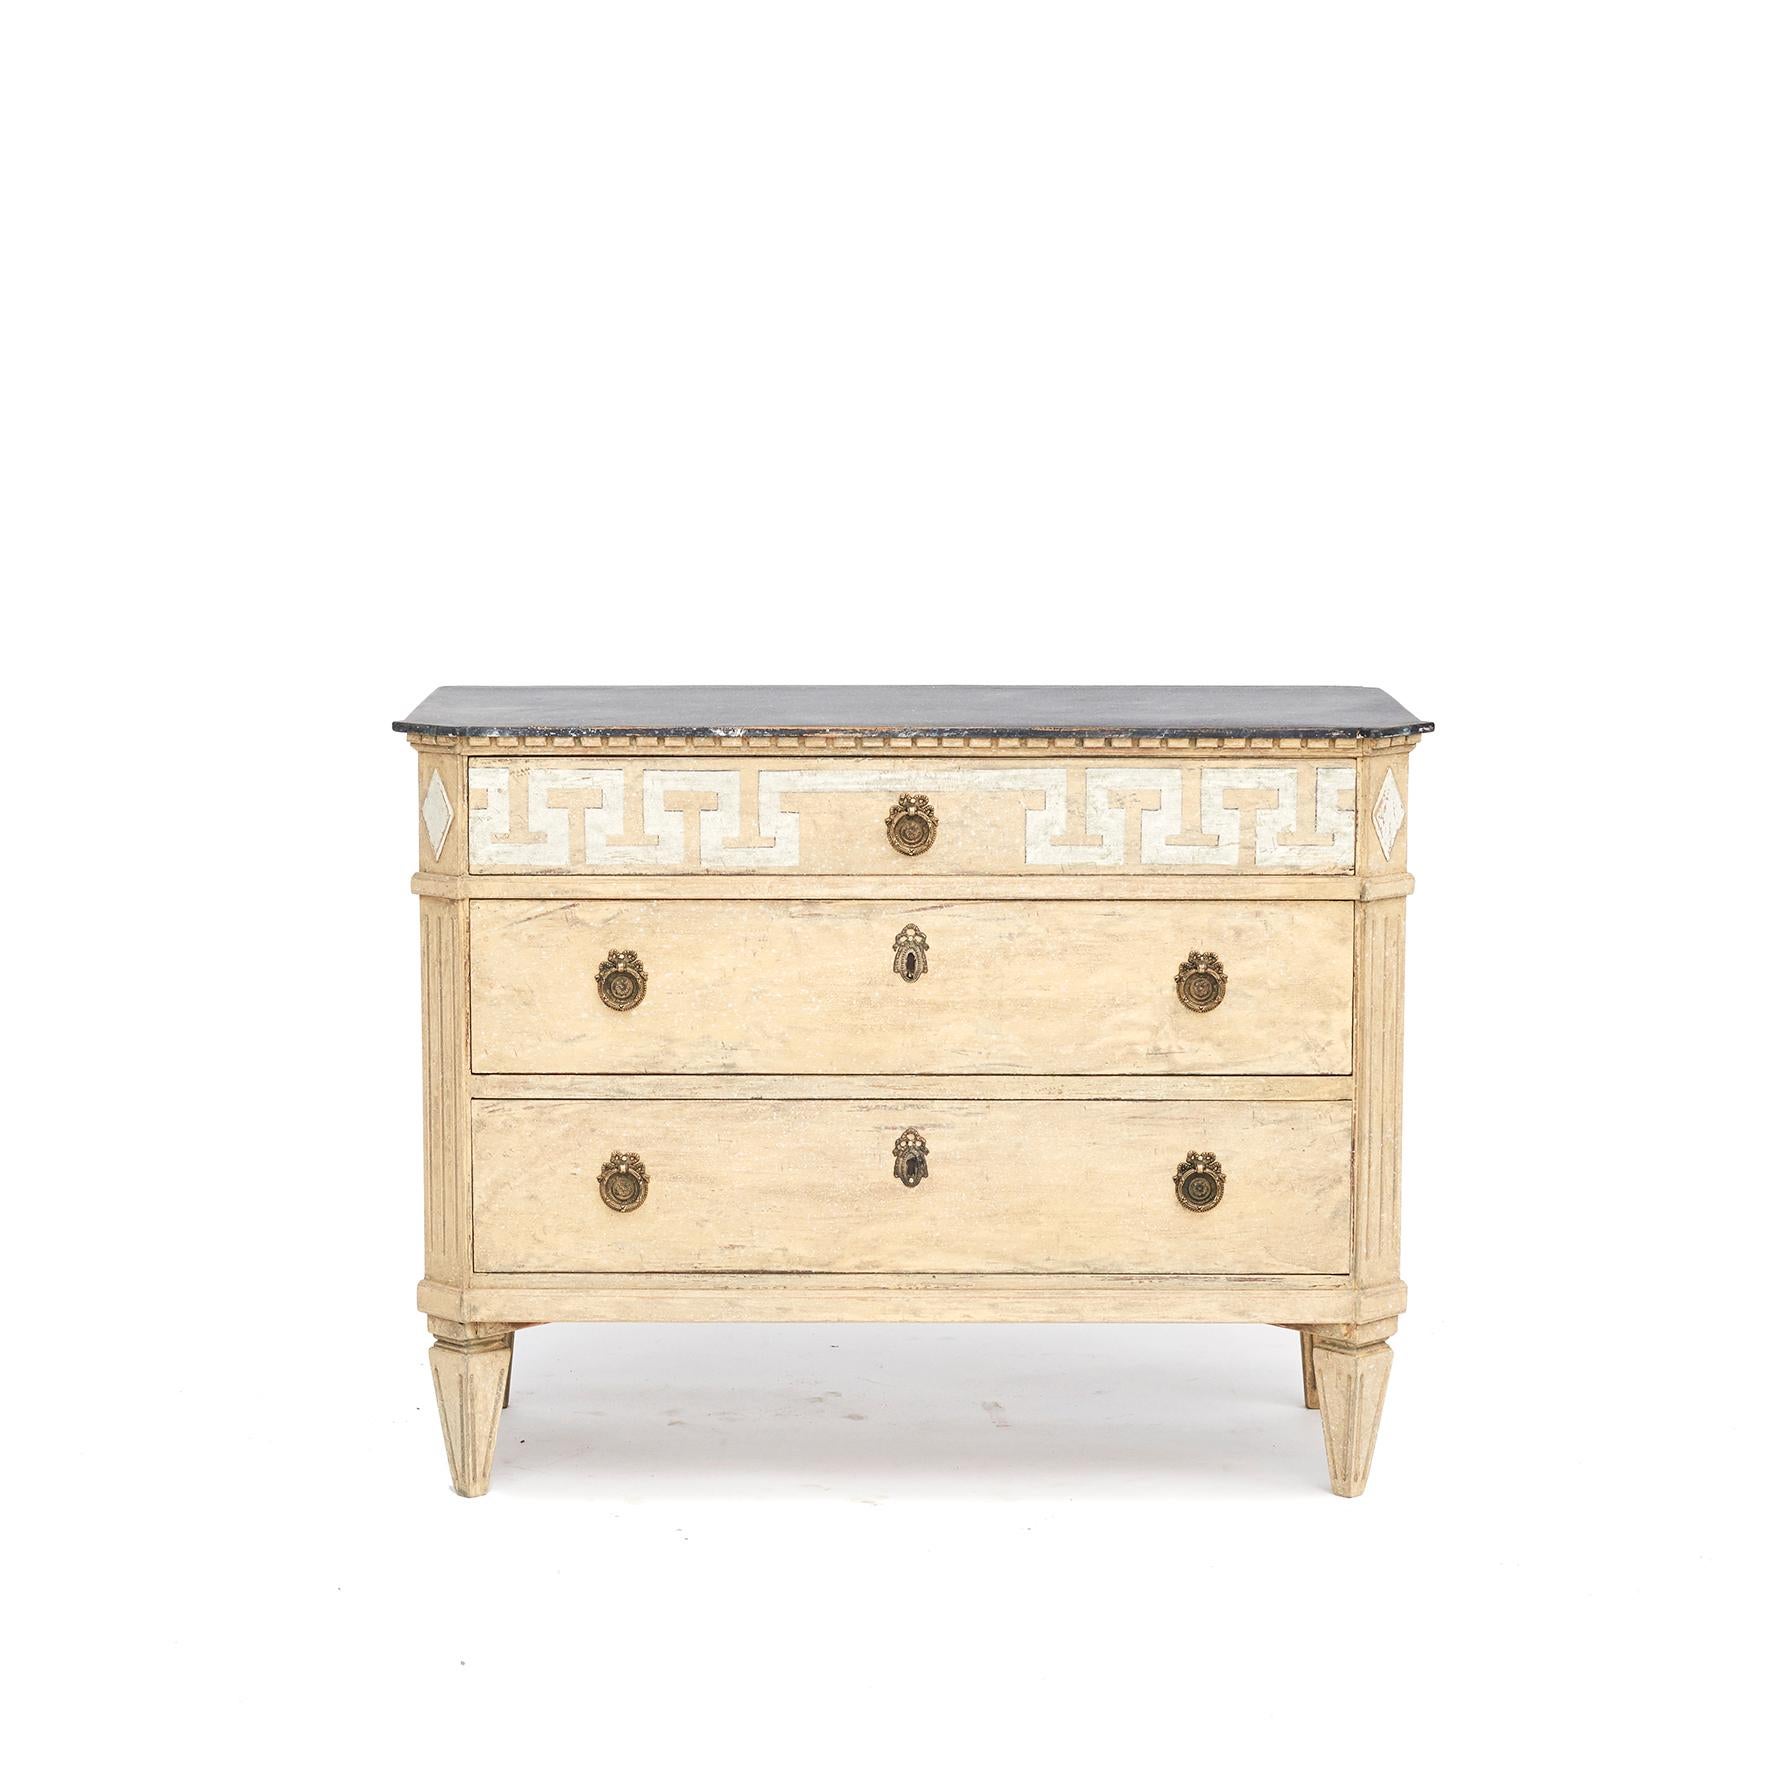 Decorative Swedish Gustavian Style chest of drawers painted in dusty antique yellow, typical of the Scandinavian taste for light palettes.
Wooden blue-gray faux marbled tabletop and dentil mouldings.
Three drawer, upper drawer decorated with white